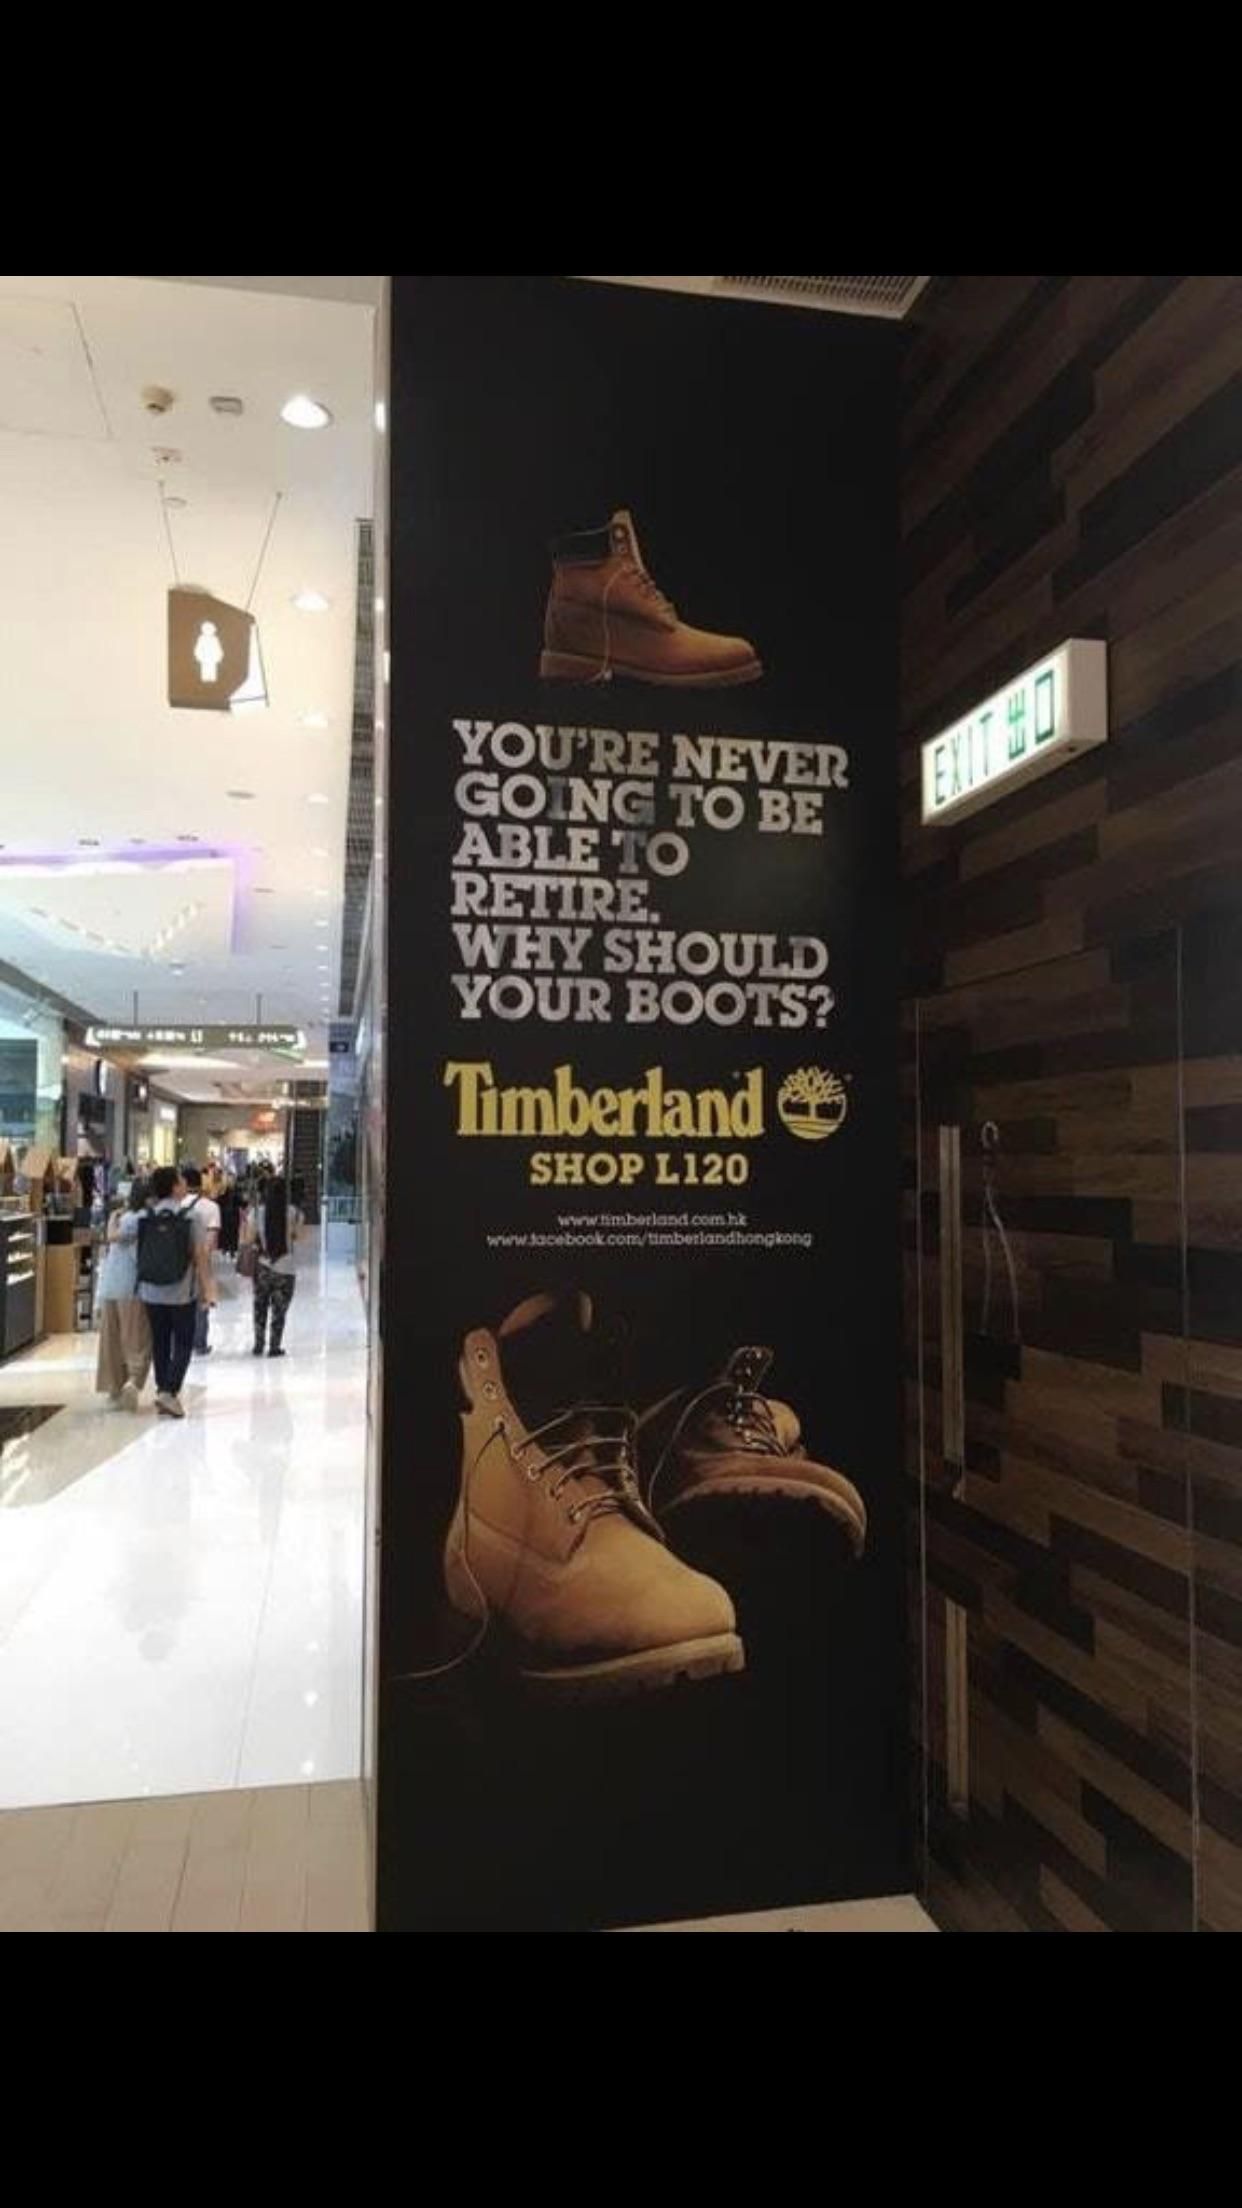 Well that depressing Timberland